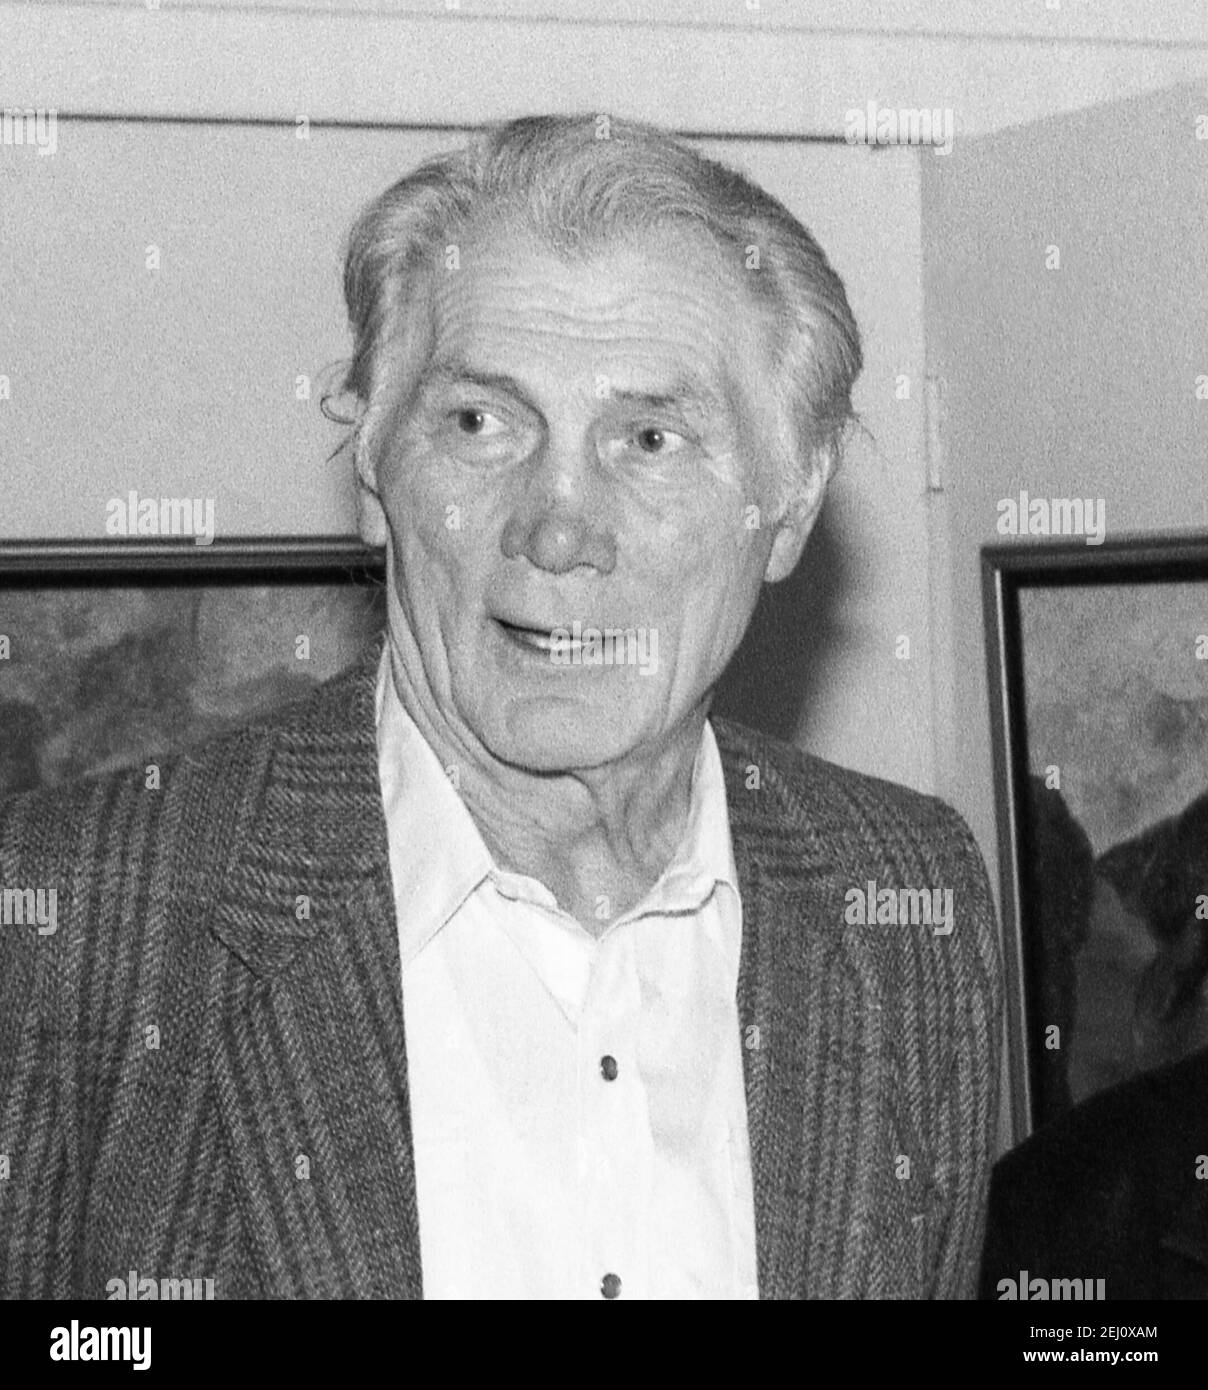 This is an image of Actor Jack Palance  of Lattimer Mines, Pennsylvania. USA. at his Art exhibit at the McDonald Gallery, Misericordia University, Dallas Pennsylvania. Date 27 March, 1992. Born 1919-Died 2006 Stock Photo